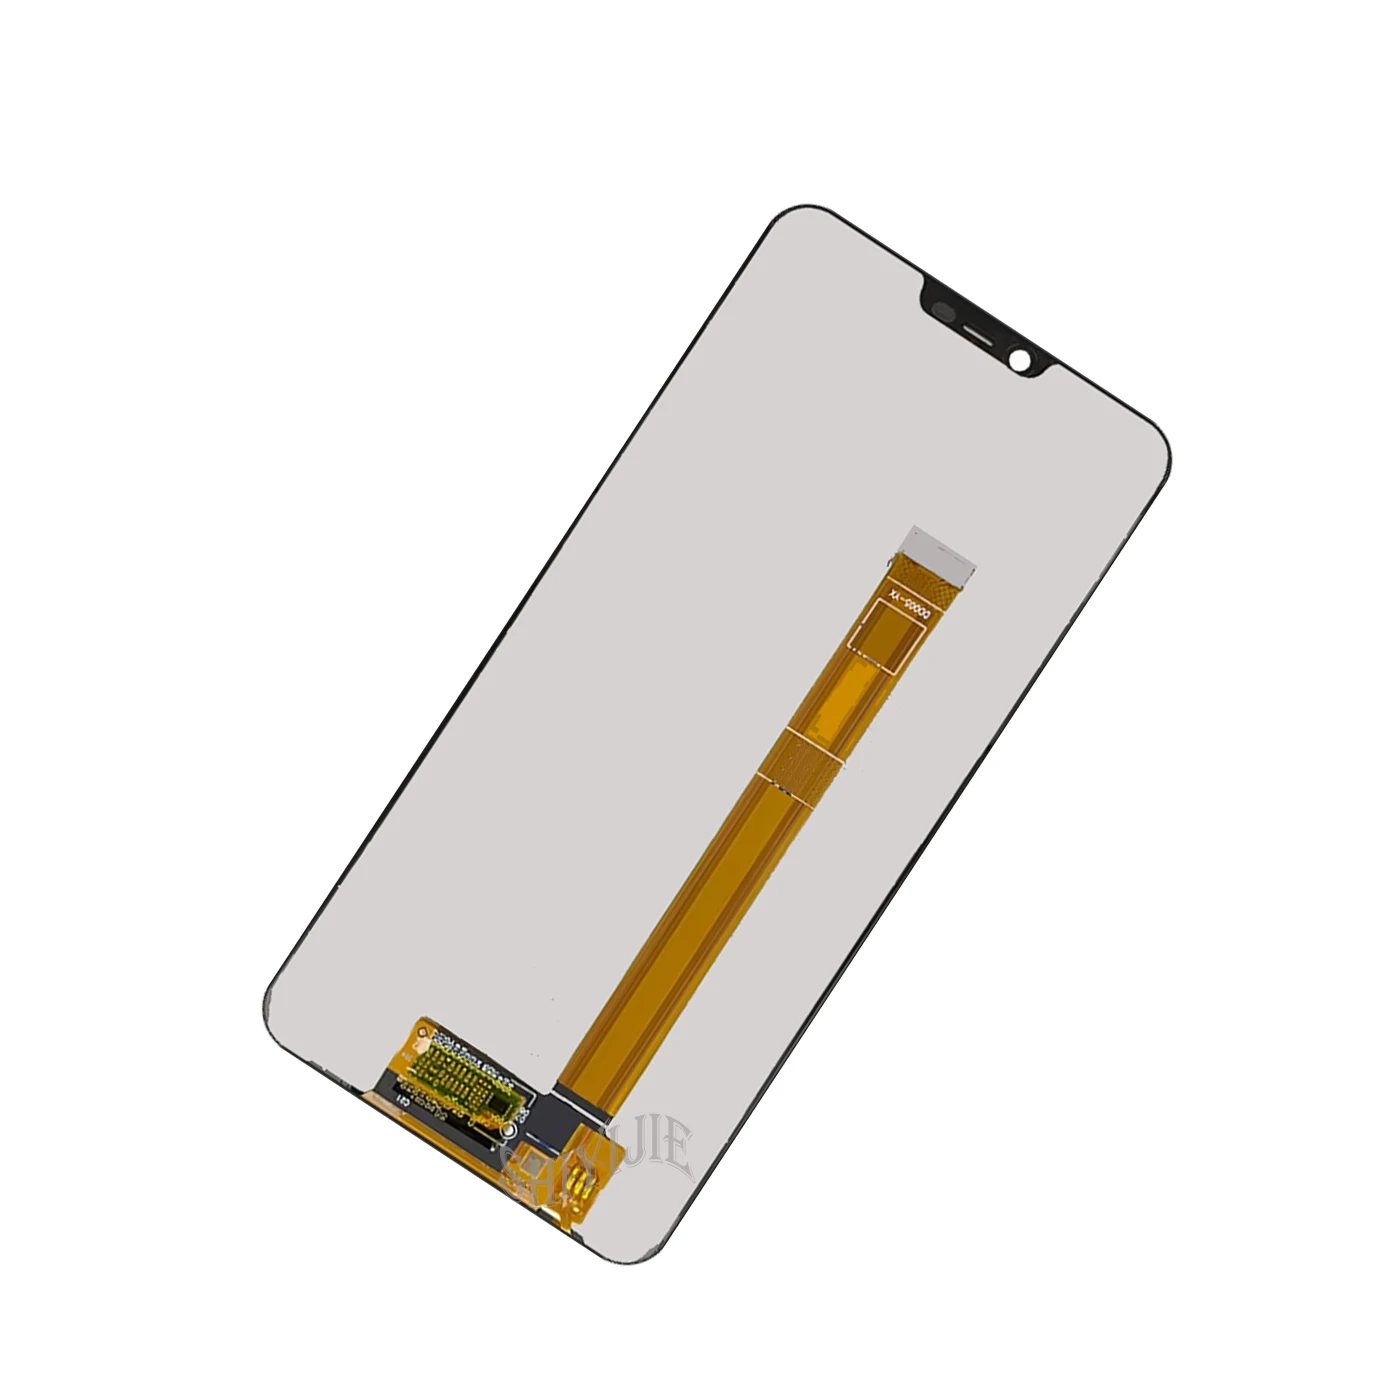 6.2" Original LCD For Oppo A3s LCD Display Touch Screen For OppoA3s CPH1803 CPH1853 CPH1805 Display with Frame Replacement Digit images - 6